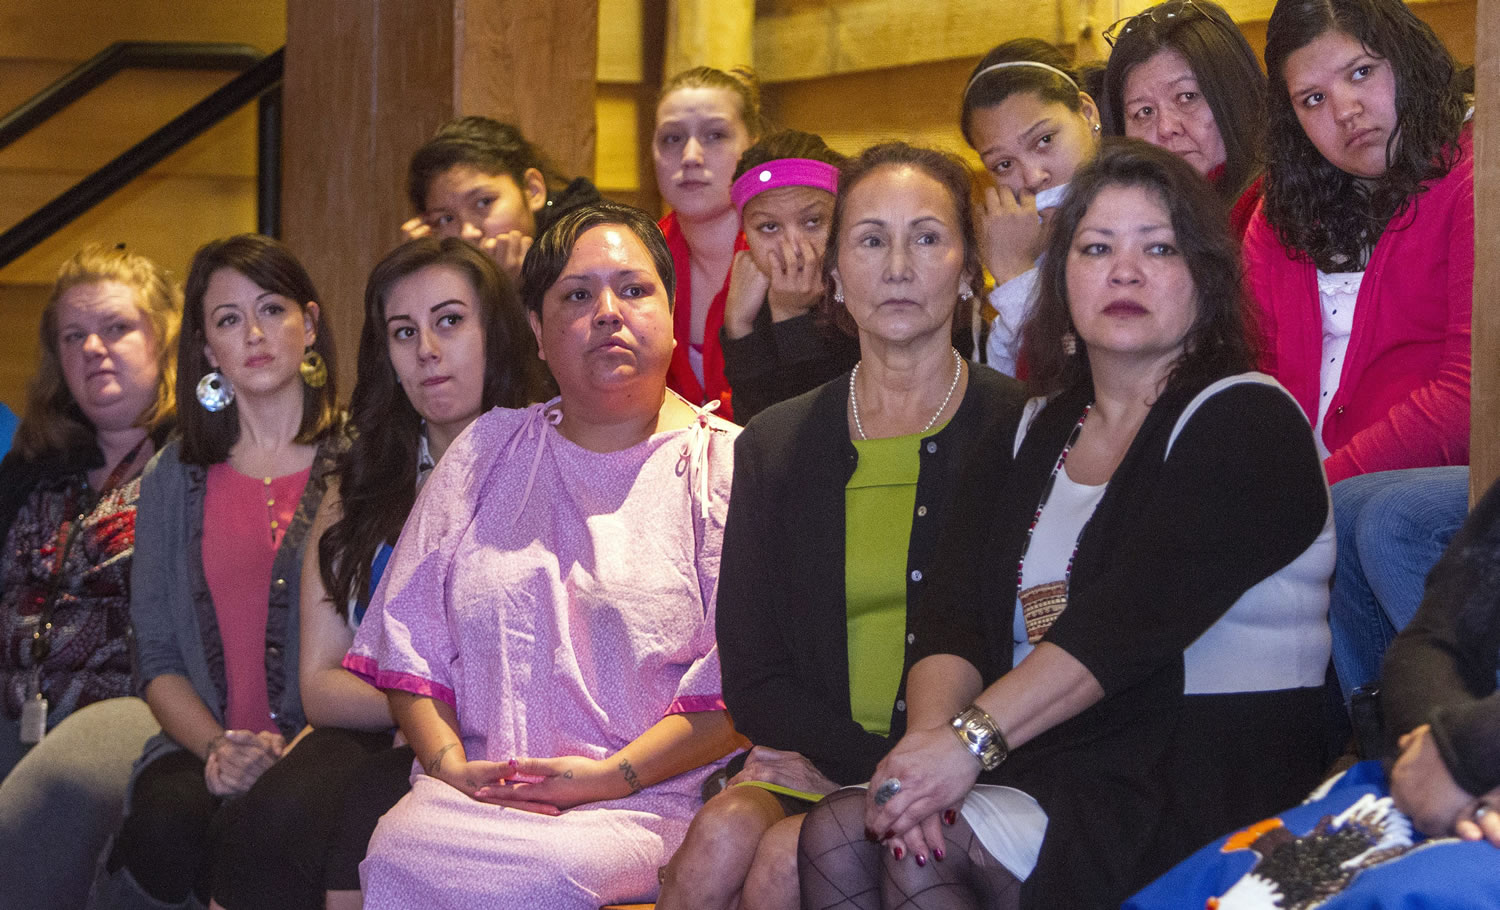 Native American Women attend a healing circle recently in the longhouse at the Hibulb Cultural Center on the Tulalip Reservation, where women gathered to discuss violence against women and to promote passage in Congress of the Violence Against Women Act.